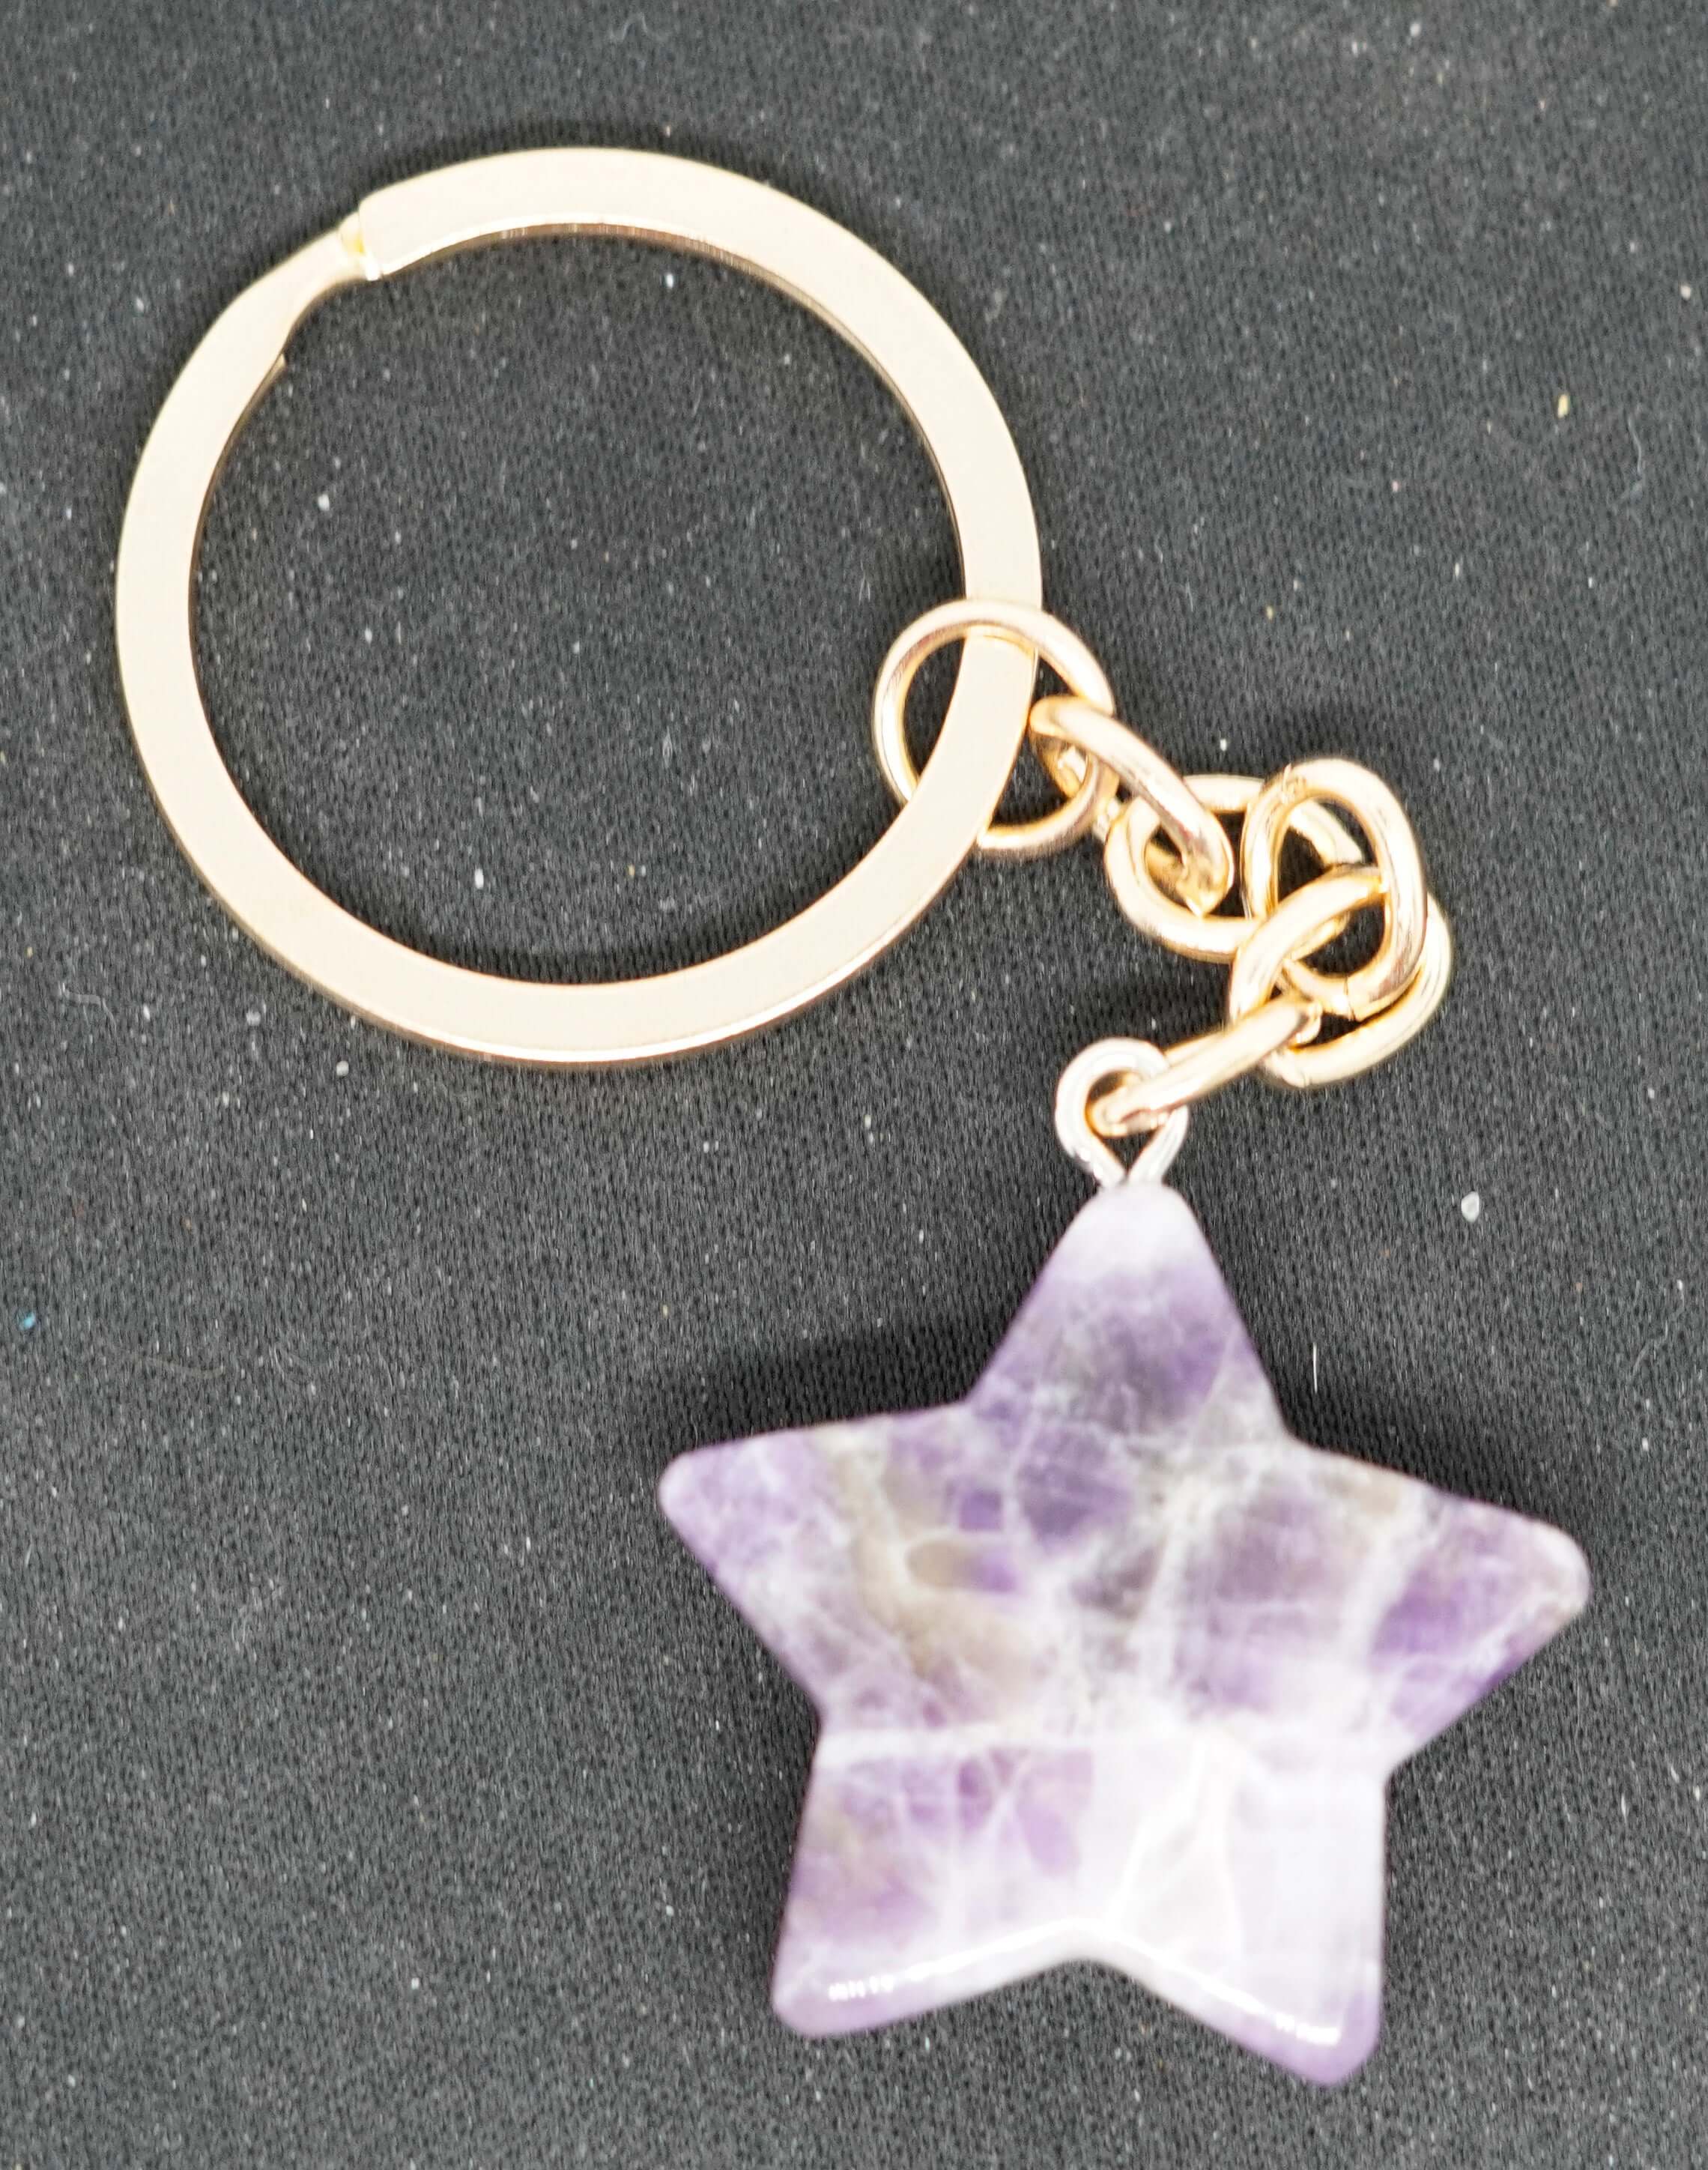 5 Pointed Star Crystal Keychains
Acid Secs Productions Inc.
5 Pointed Star Crystal Keychains Note: These are Local Canadian Stock. They will be packaged extremely safely and delivered by Canada Post/UPS/DHL/Other Local Couriers.
agate, amethyst, ammolite, angel, AOP, apatite, beads, black tourmaline, Blue Crystal, blue flash, blue fluorite, blue kyanite, blue smelting, blue vein, Blue vein stone, citrine, cluster, Collectable Items, collection, cool design, Crystal, crystal ball, Crystal Pipe, crystal pipes